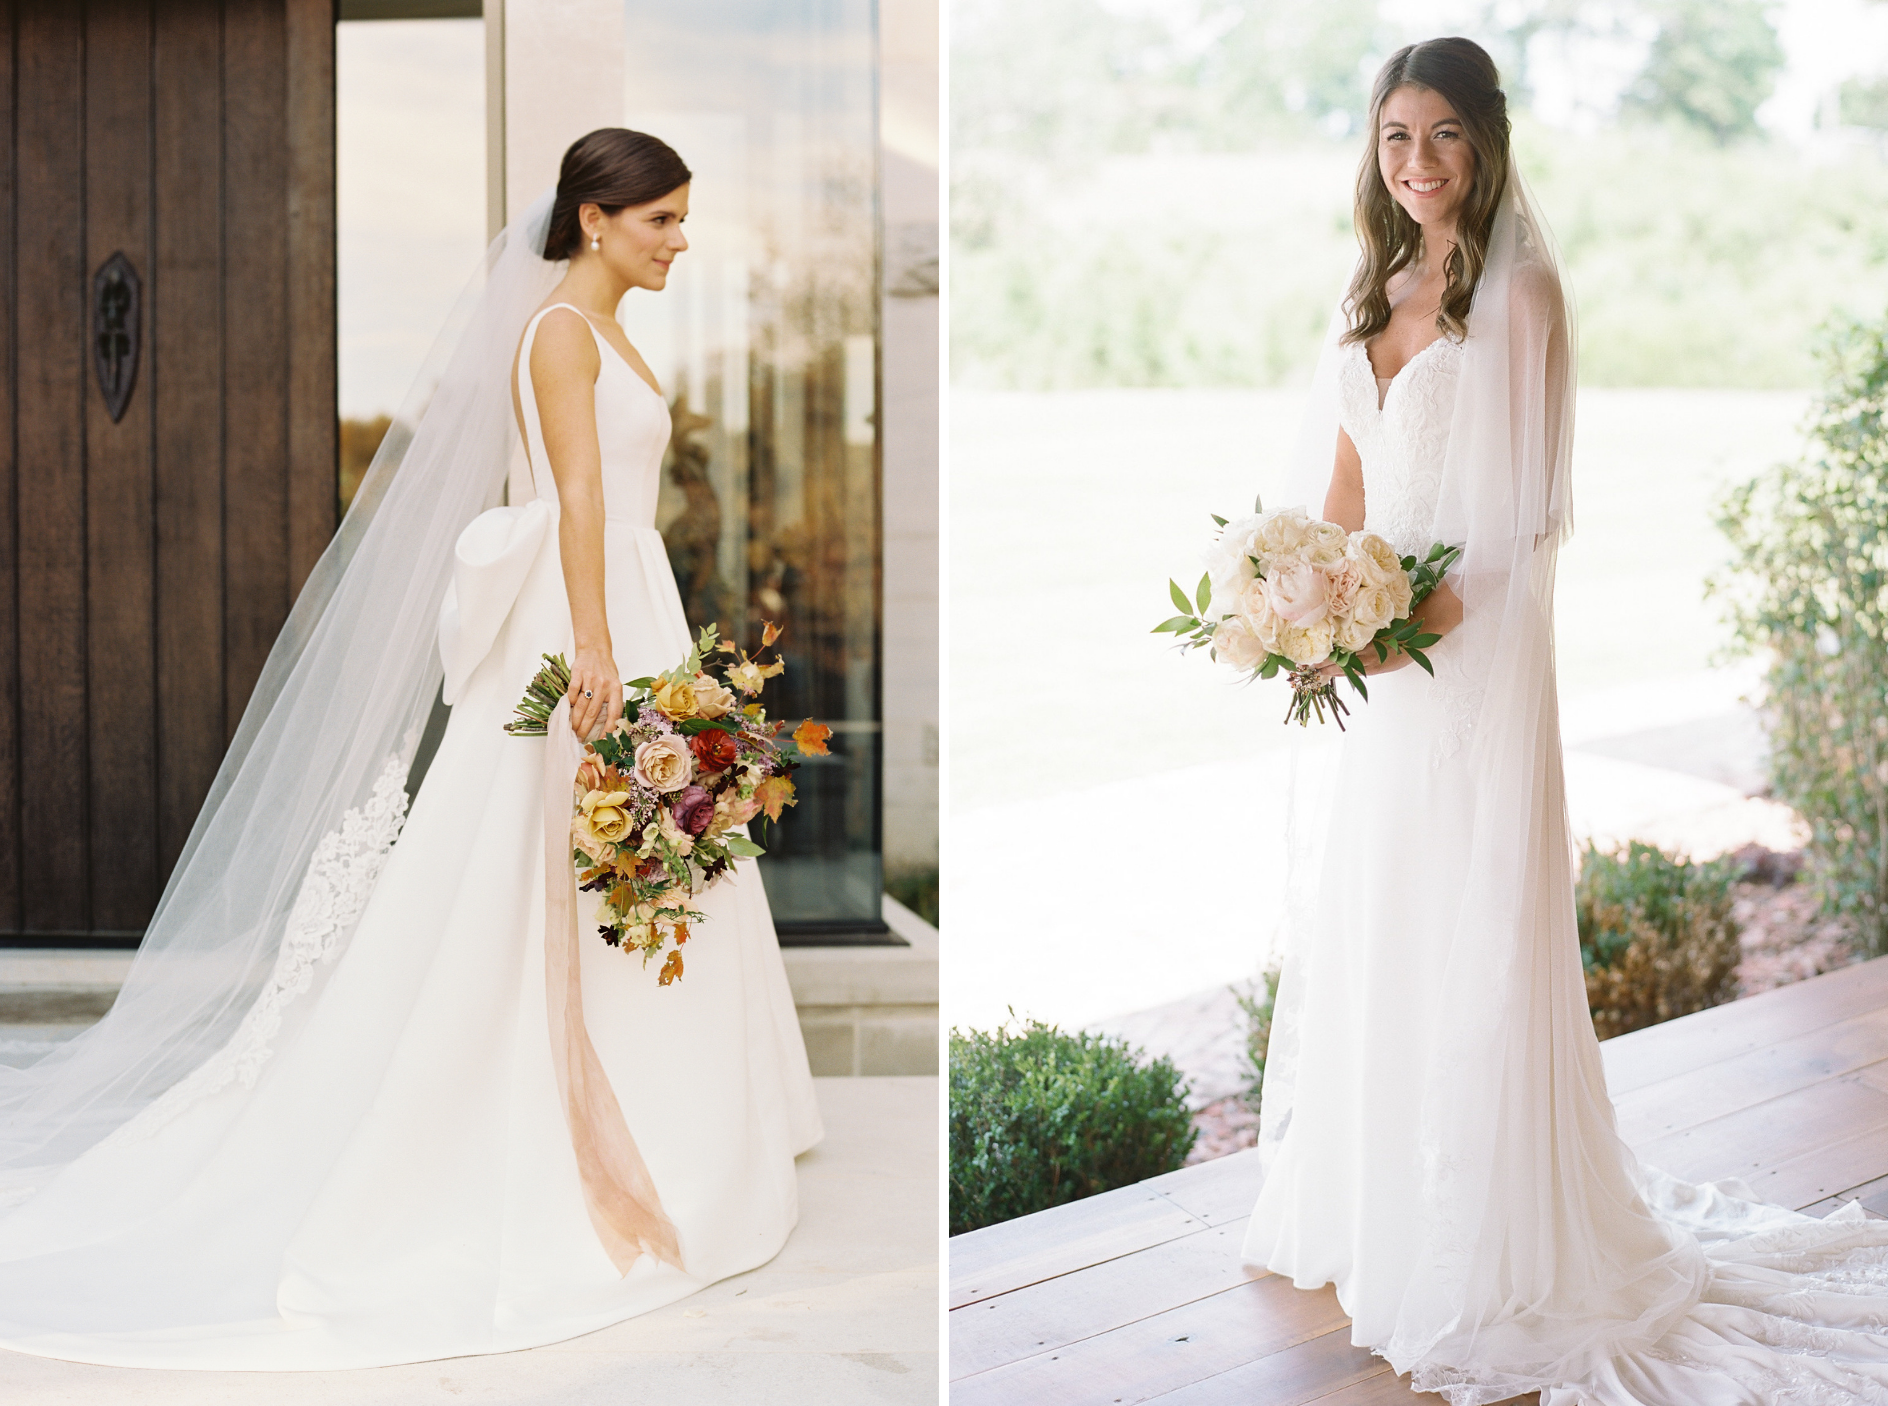 Brides in simple gowns in varying shades of white, holding floral bouquets. 